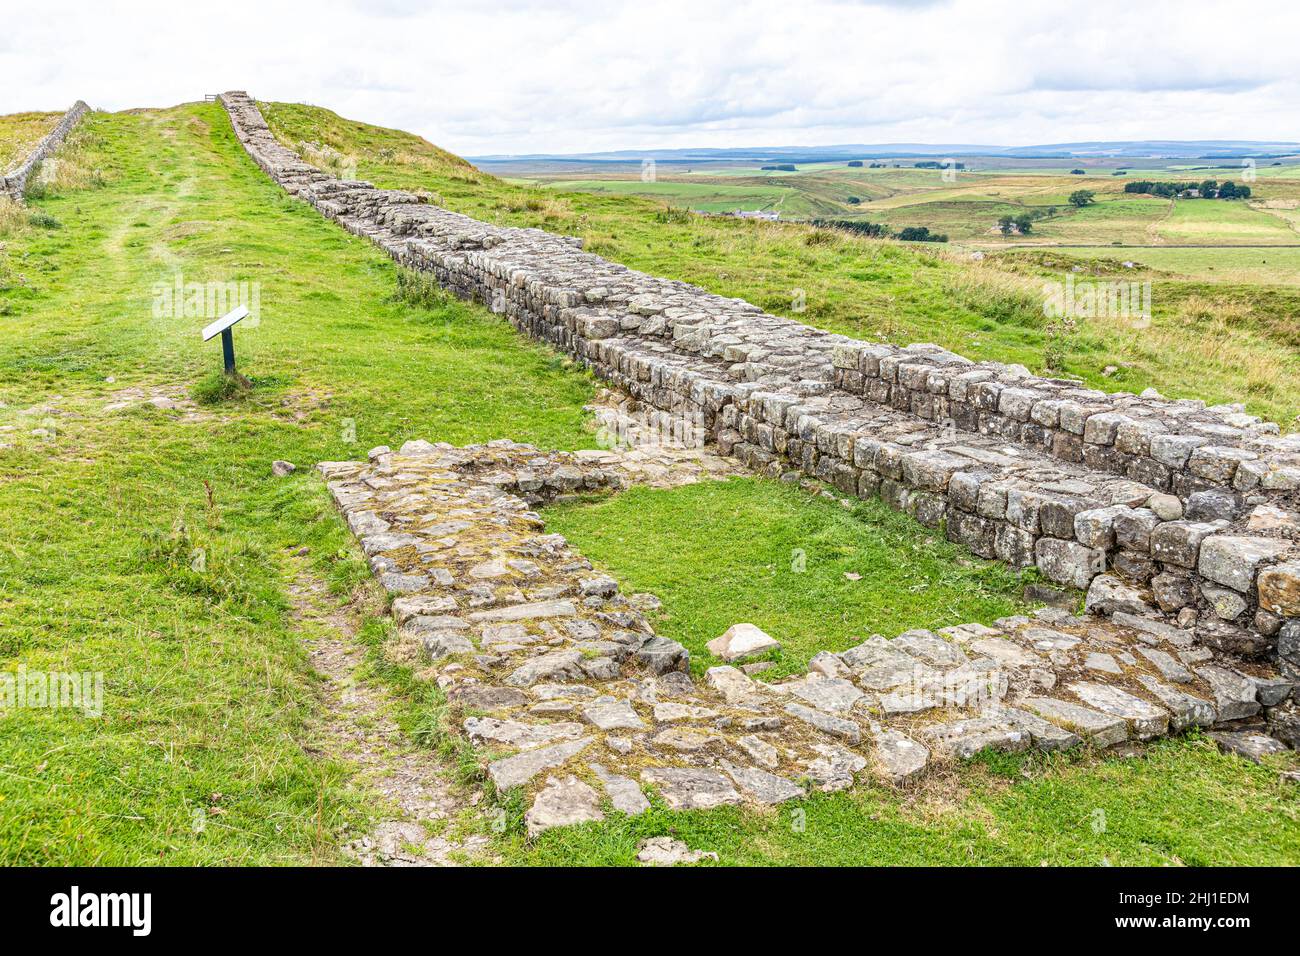 Turret 41a on Hadrians Wall at Caw Gap, Shield on the Wall, Northumberland UK Stock Photo